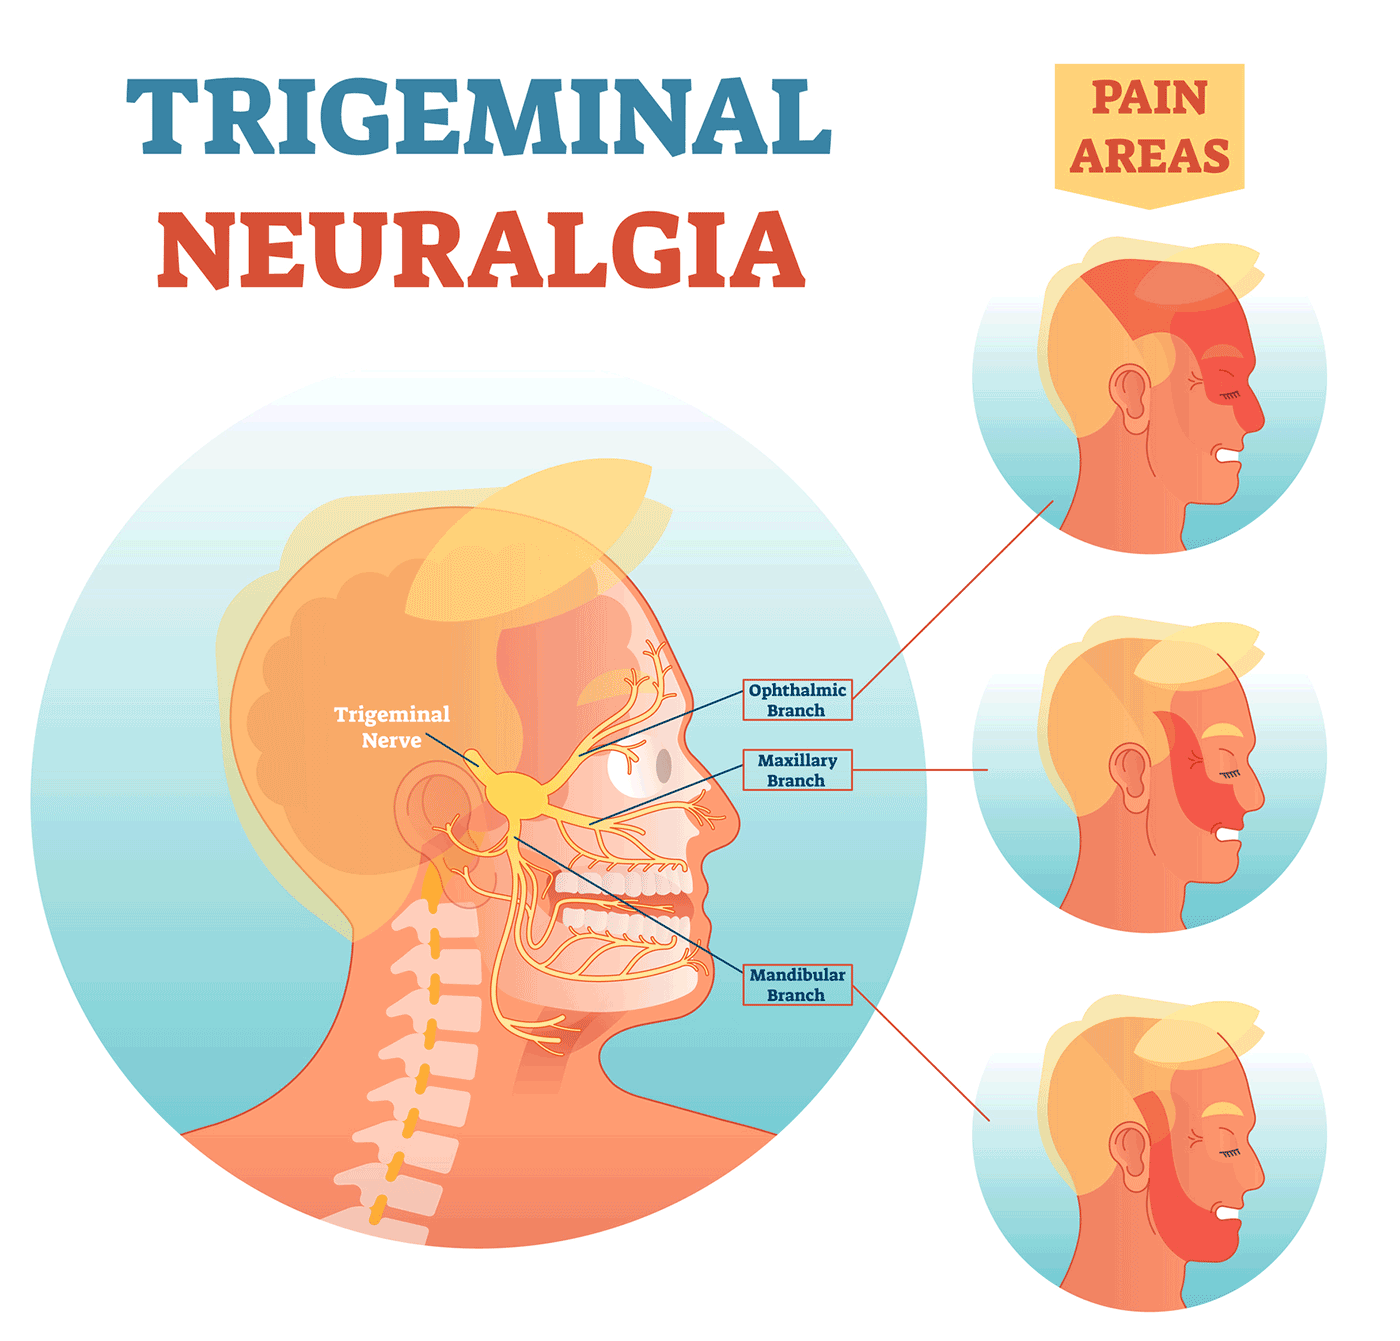 Diagram of the three different branches of the trigeminal nerve: the ophthalmic branch runs near the eye and leads to pain across the top half of the face and forehead; the maxillary branch runs across the nose and causes pain up cheeks and toward the temple; the mandibular branch starts near the ear and causes pain  down the jaw.